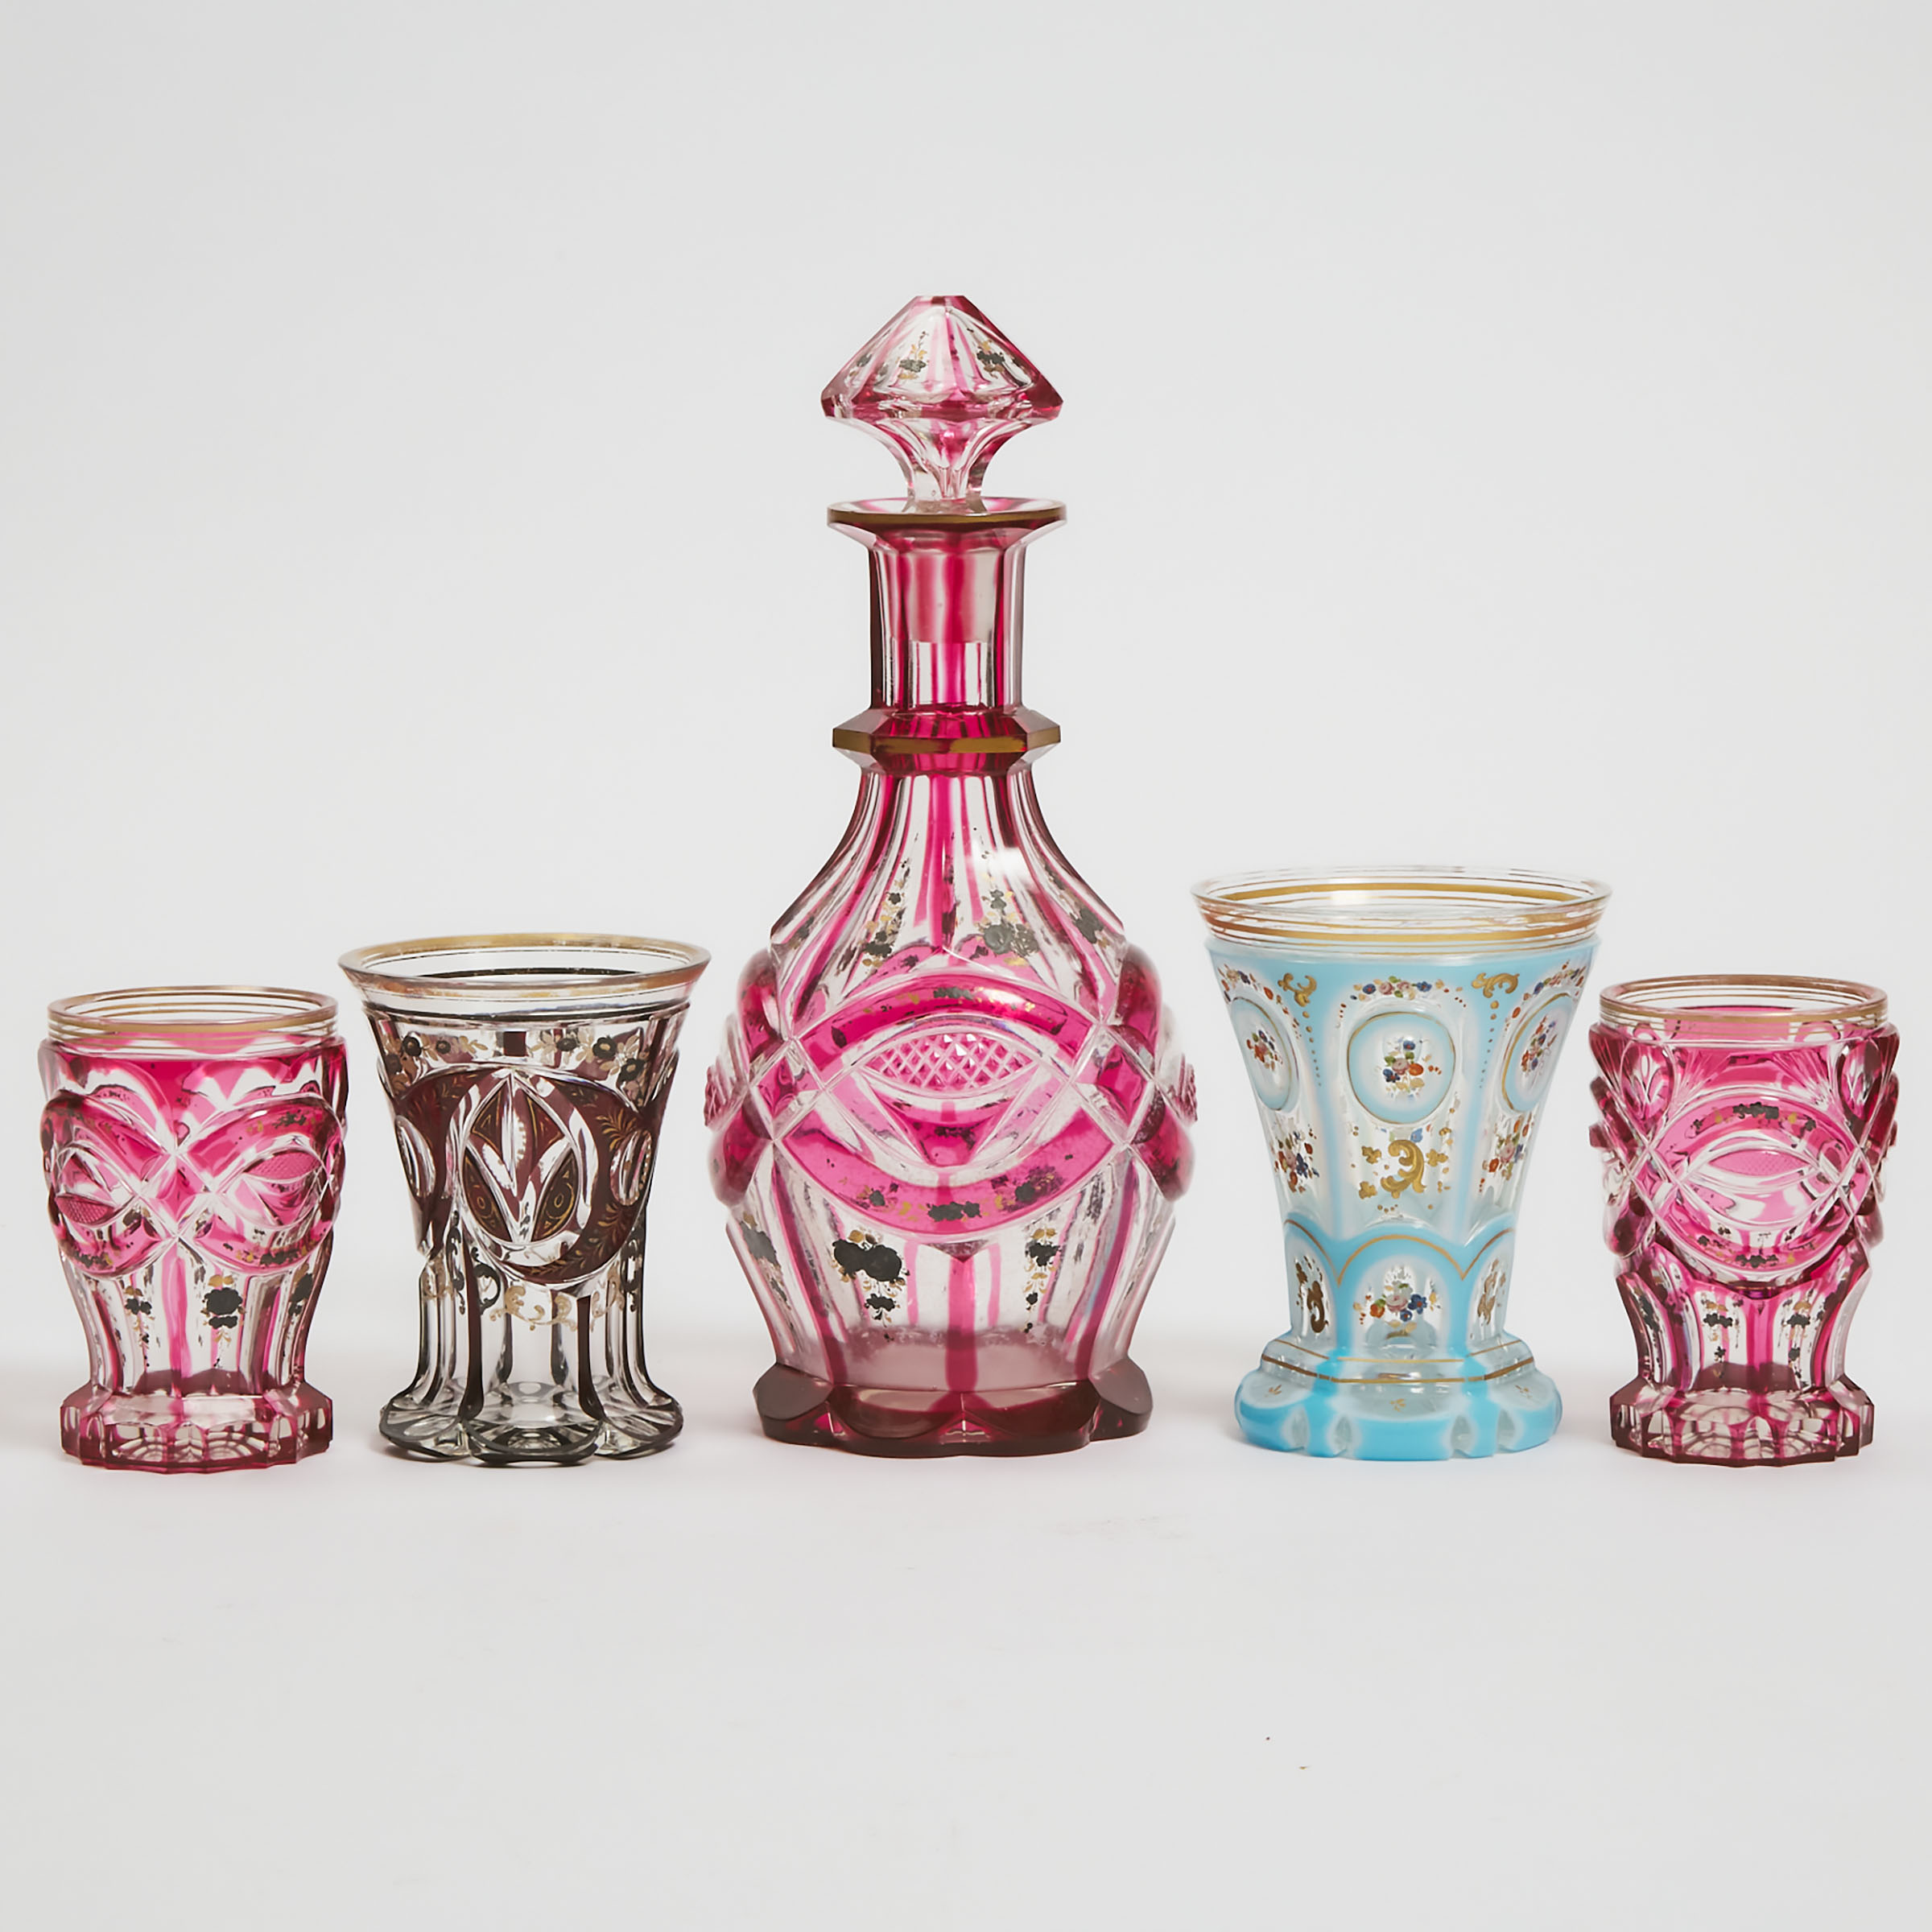 Four Bohemian Overlaid, Cut and Enameled or Gilt Glass Beakers and a Decanter, late 19th century